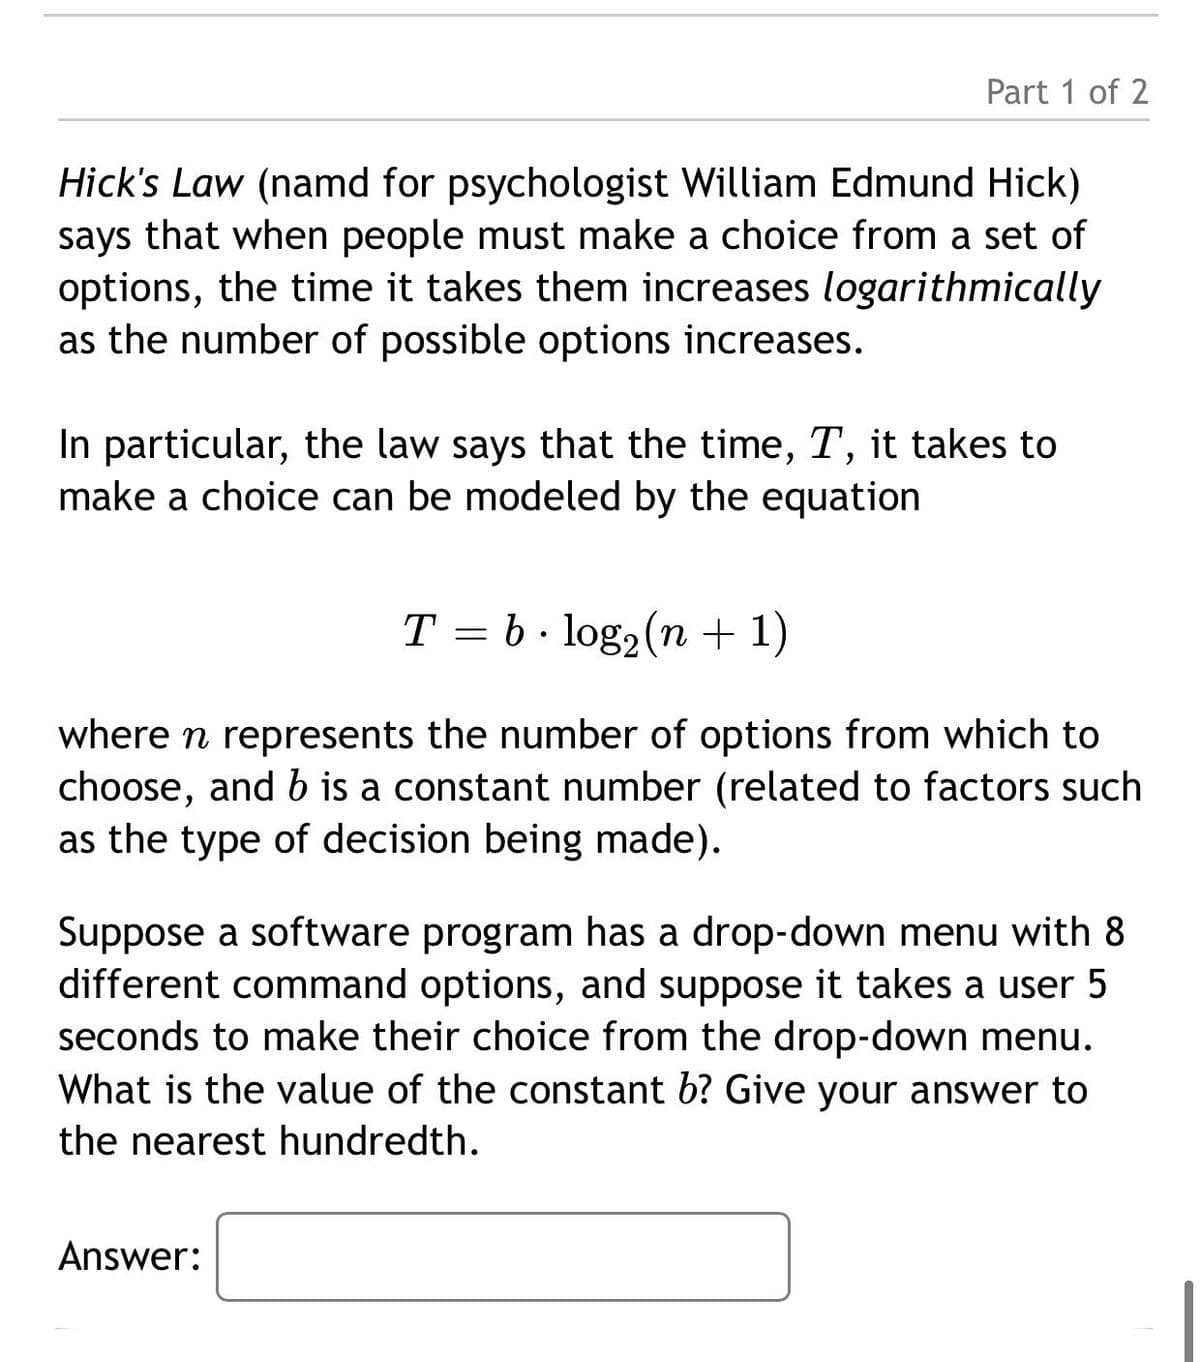 Part 1 of 2
Hick's Law (namd for psychologist William Edmund Hick)
says that when people must make a choice from a set of
options, the time it takes them increases logarithmically
as the number of possible options increases.
In particular, the law says that the time, T, it takes to
make a choice can be modeled by the equation
T = b · log2(n + 1)
where n represents the number of options from which to
choose, and b is a constant number (related to factors such
as the type of decision being made).
Suppose a software program has a drop-down menu with 8
different command options, and suppose it takes a user 5
seconds to make their choice from the drop-down menu.
What is the value of the constant b? Give your answer to
the nearest hundredth.
Answer:
